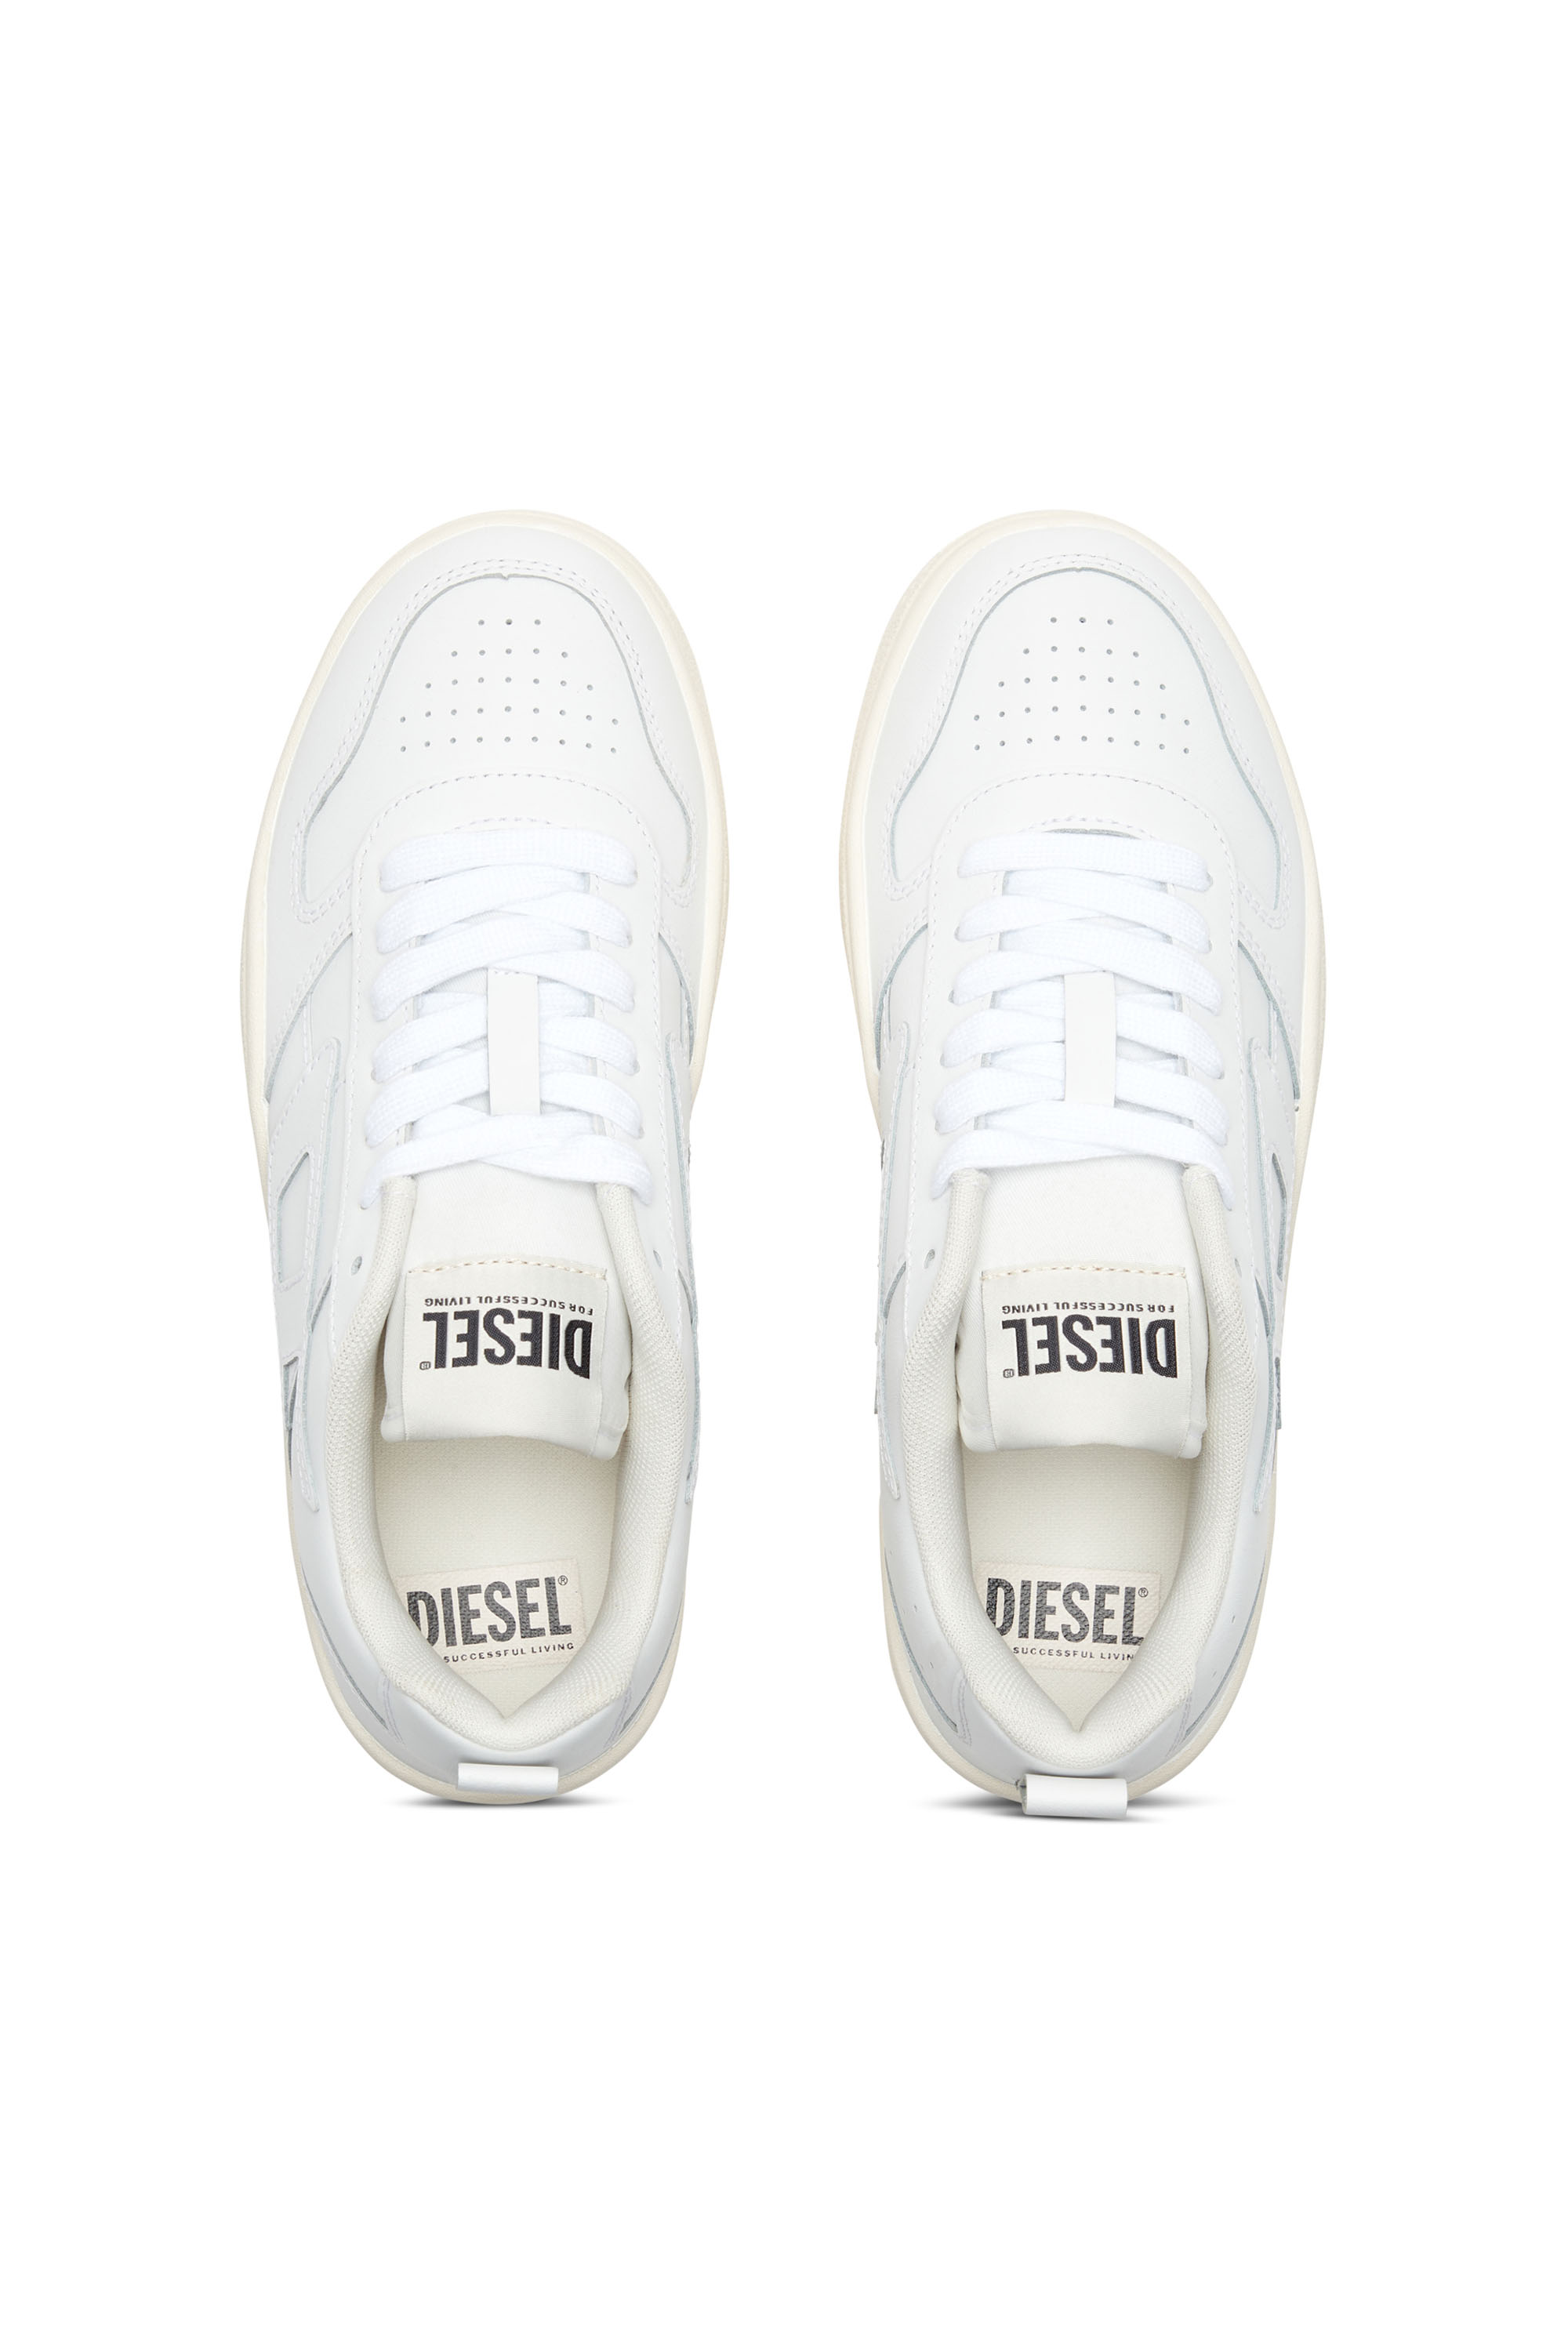 Diesel - S-UKIYO V2 LOW W, Woman S-Ukiyo Low-Low-top sneakers in leather and nylon in White - Image 5